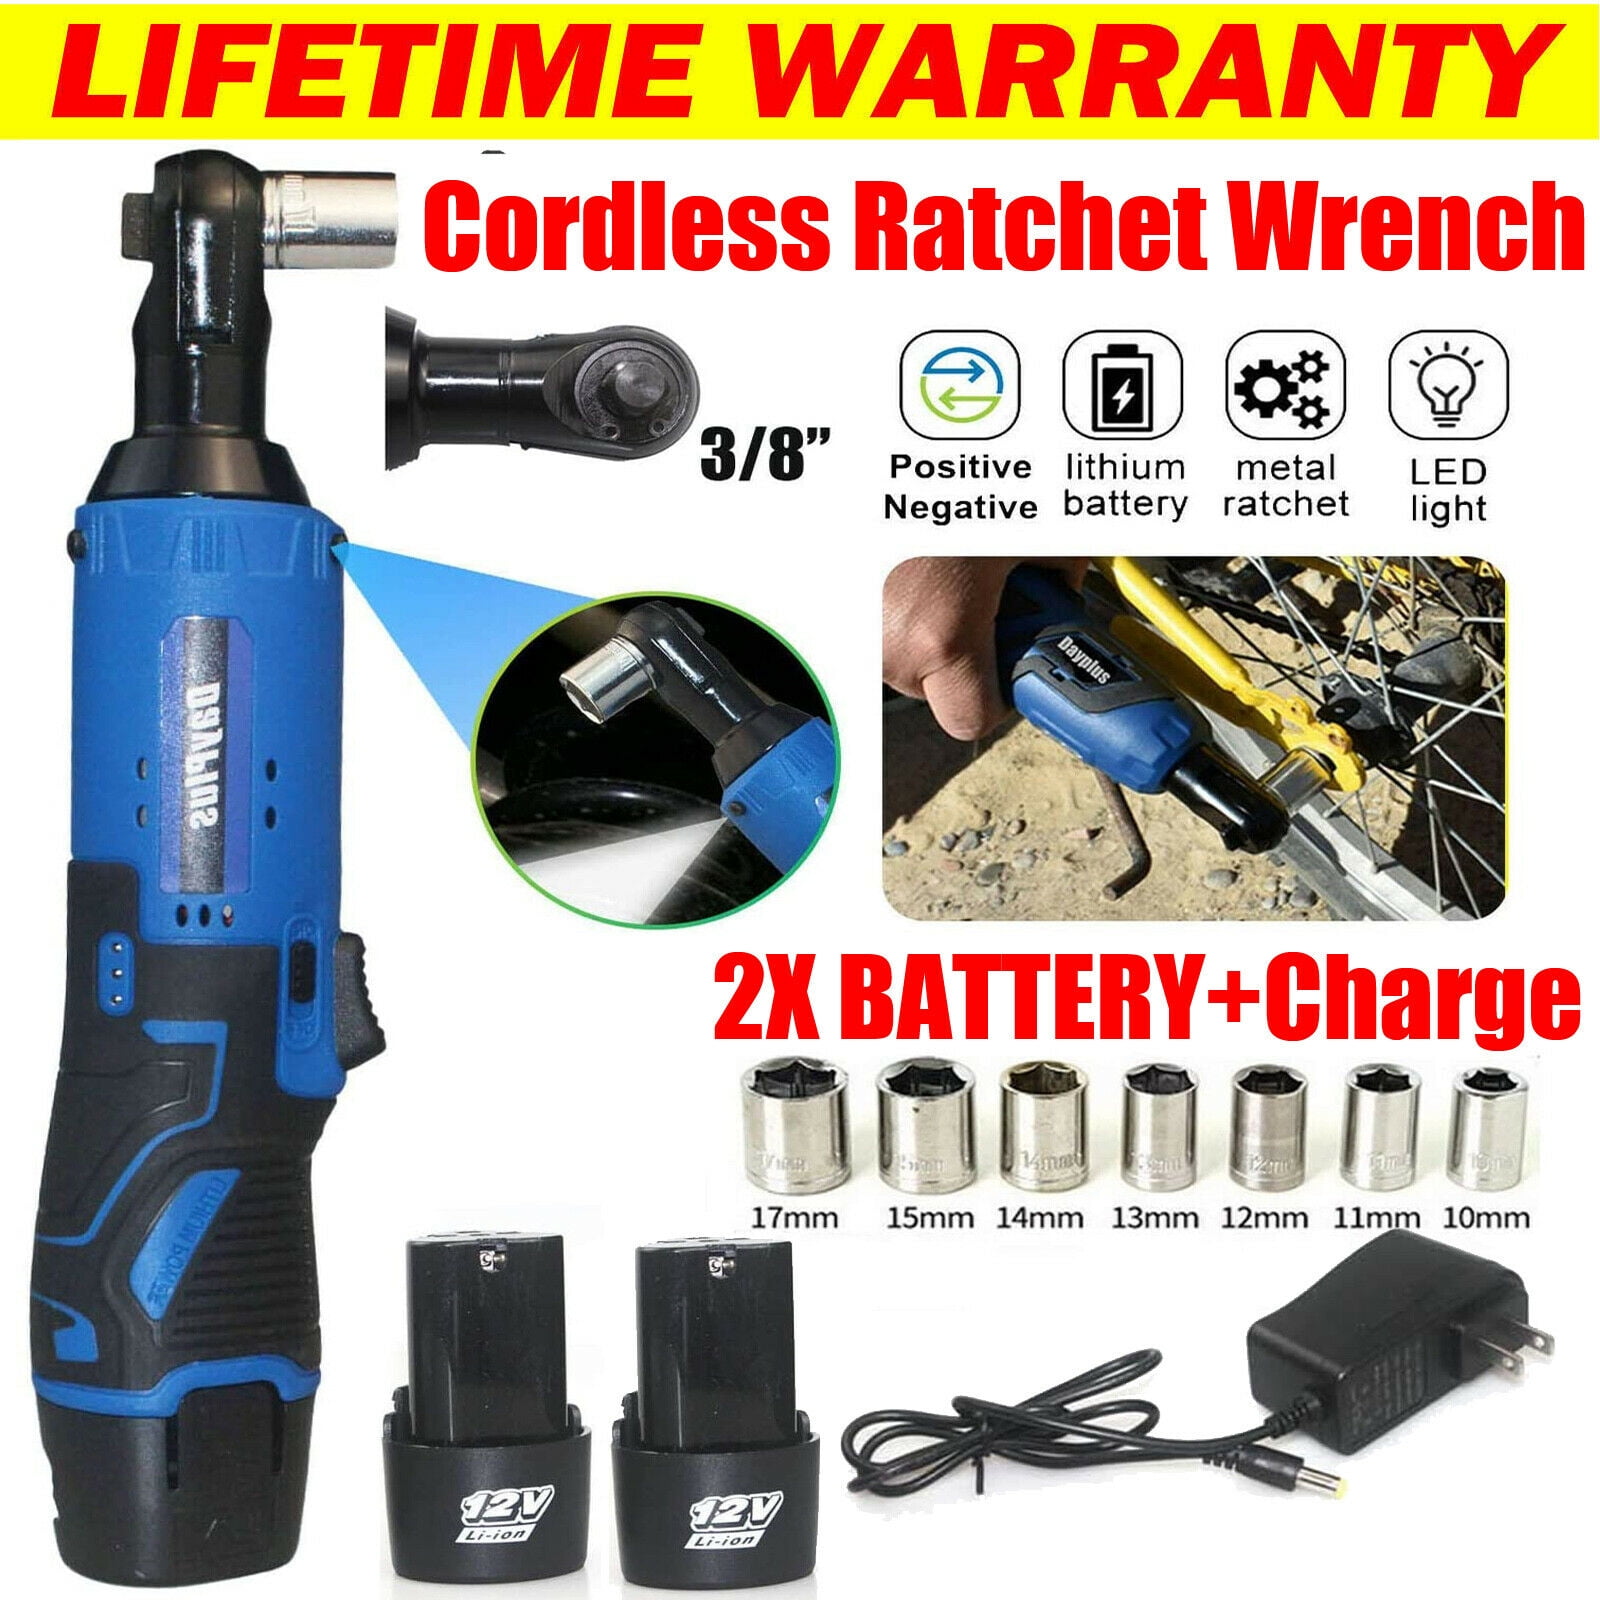 3/8" 65N.m Cordless Electric Ratchet Wrench 12V Power Electric Ratchet Tool USA 